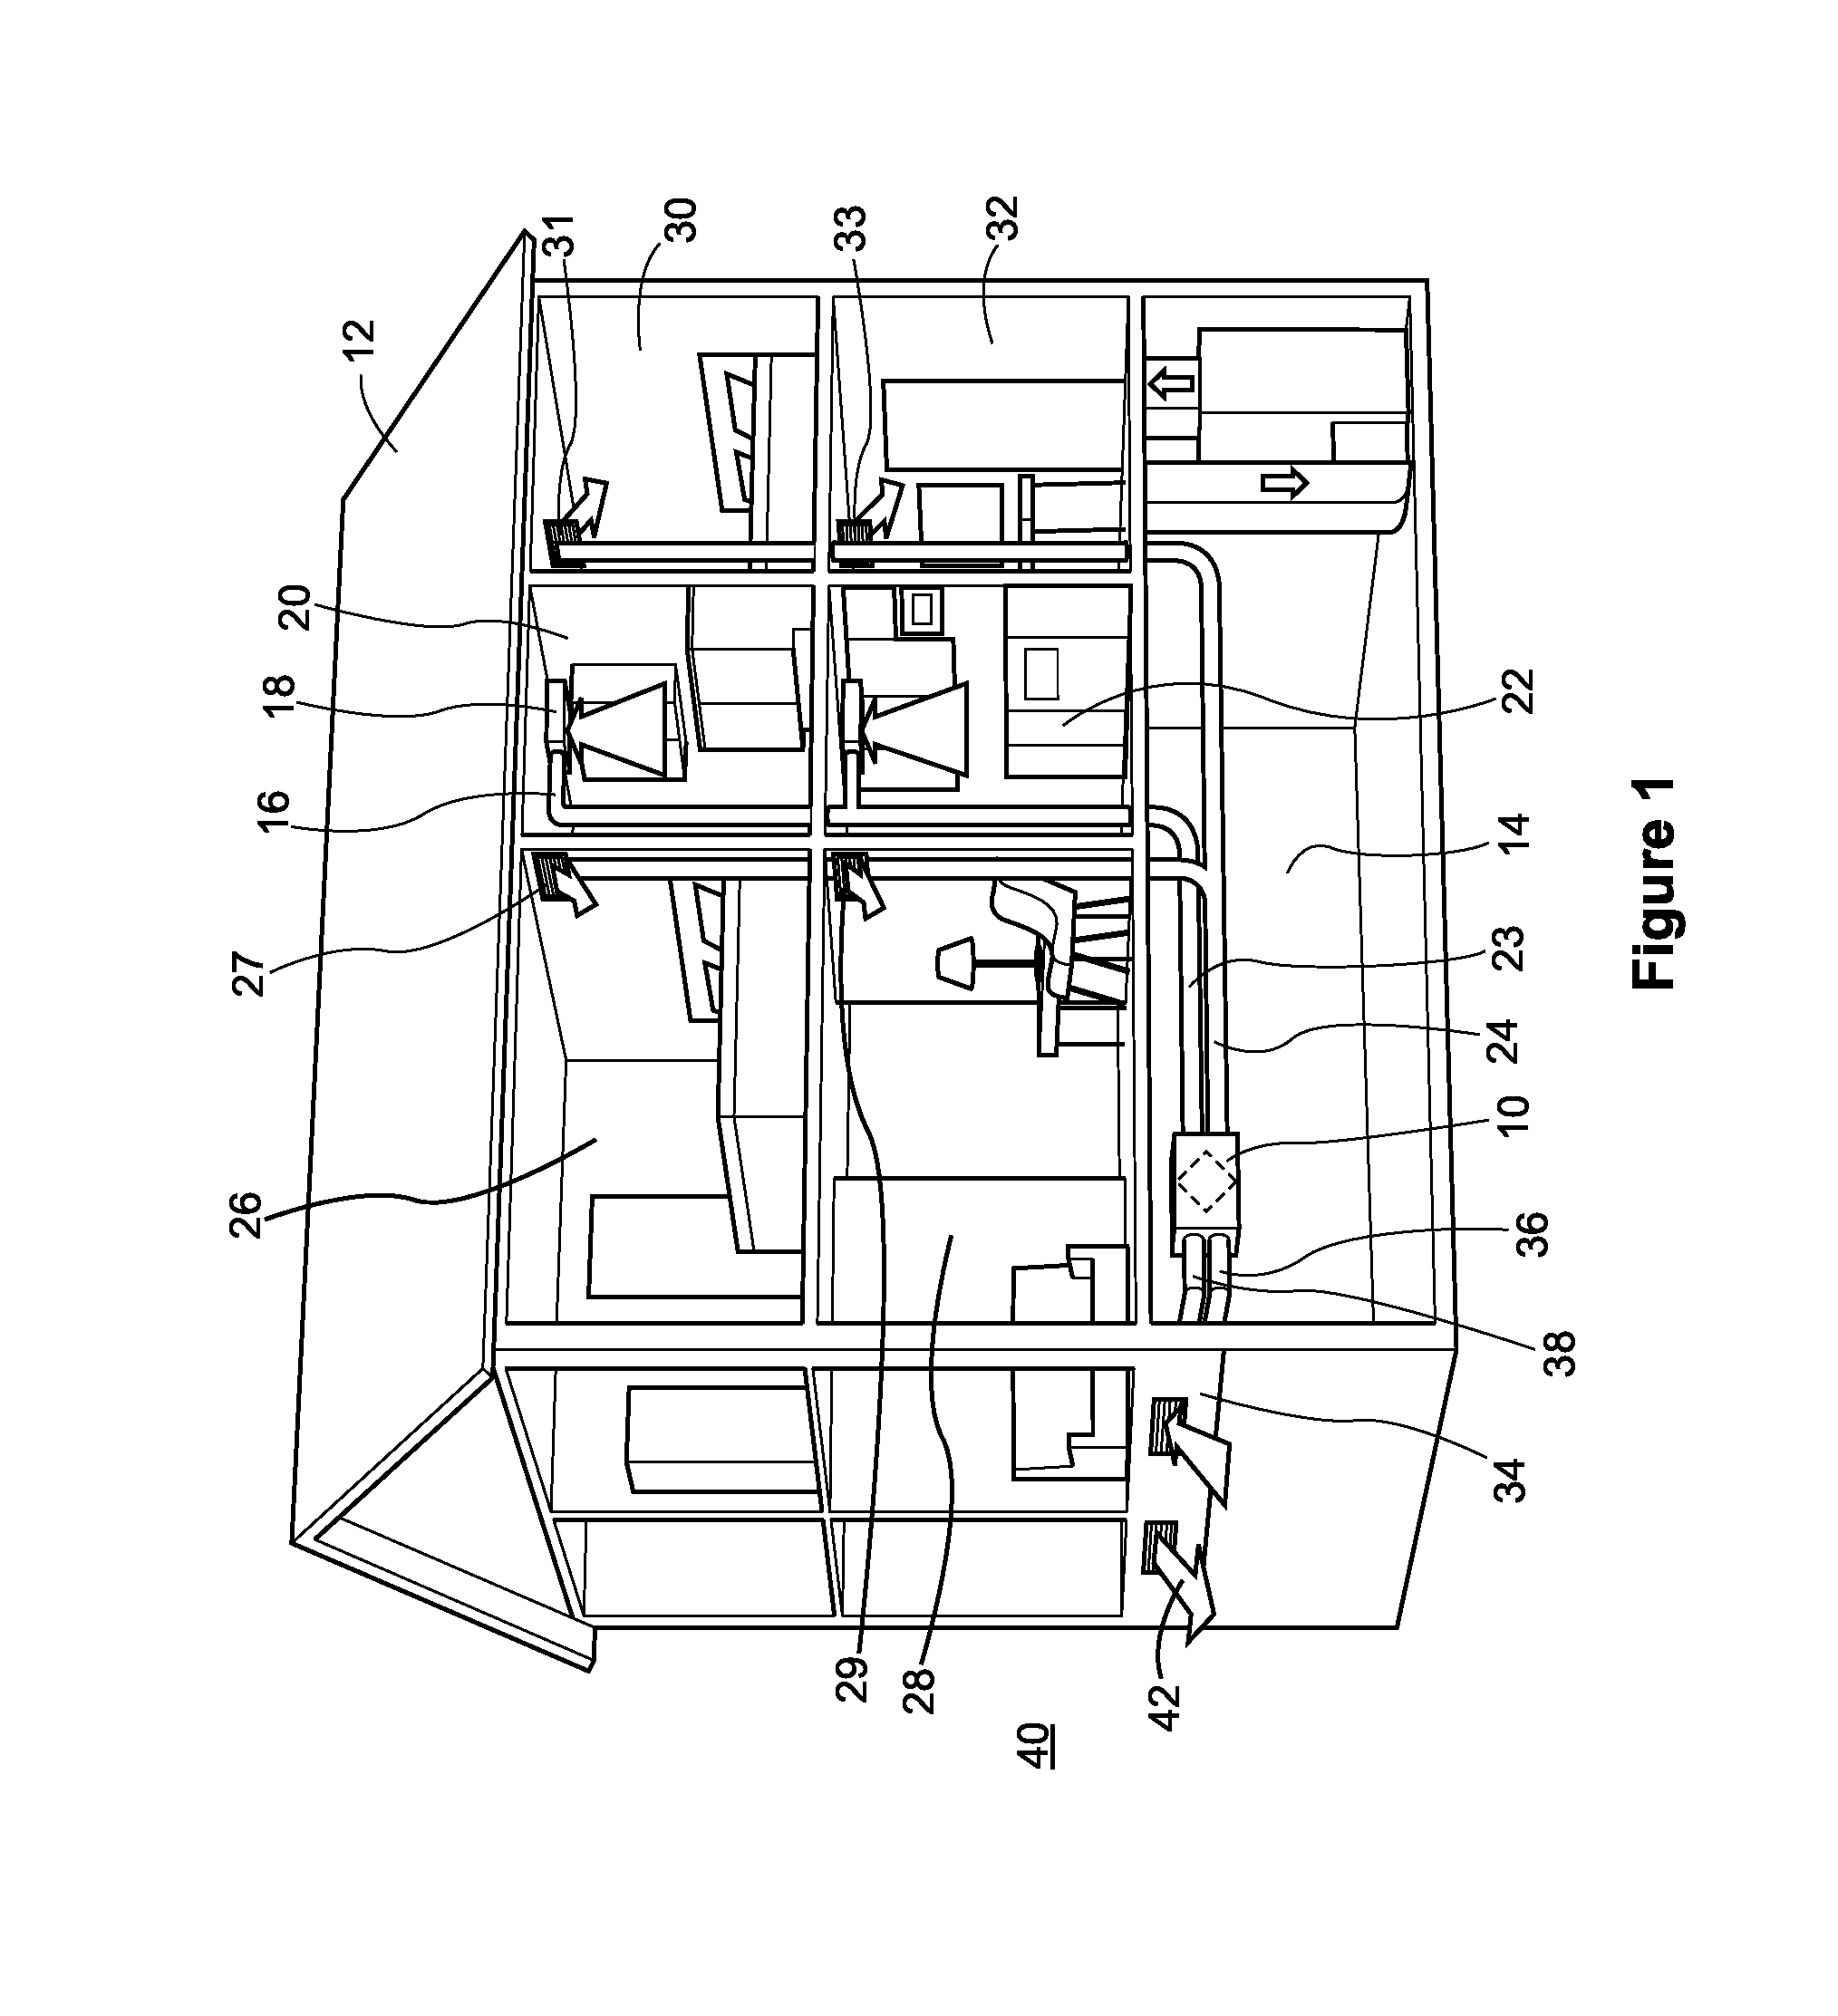 Hrv/erv with improved air flow balancing and method of operating the same